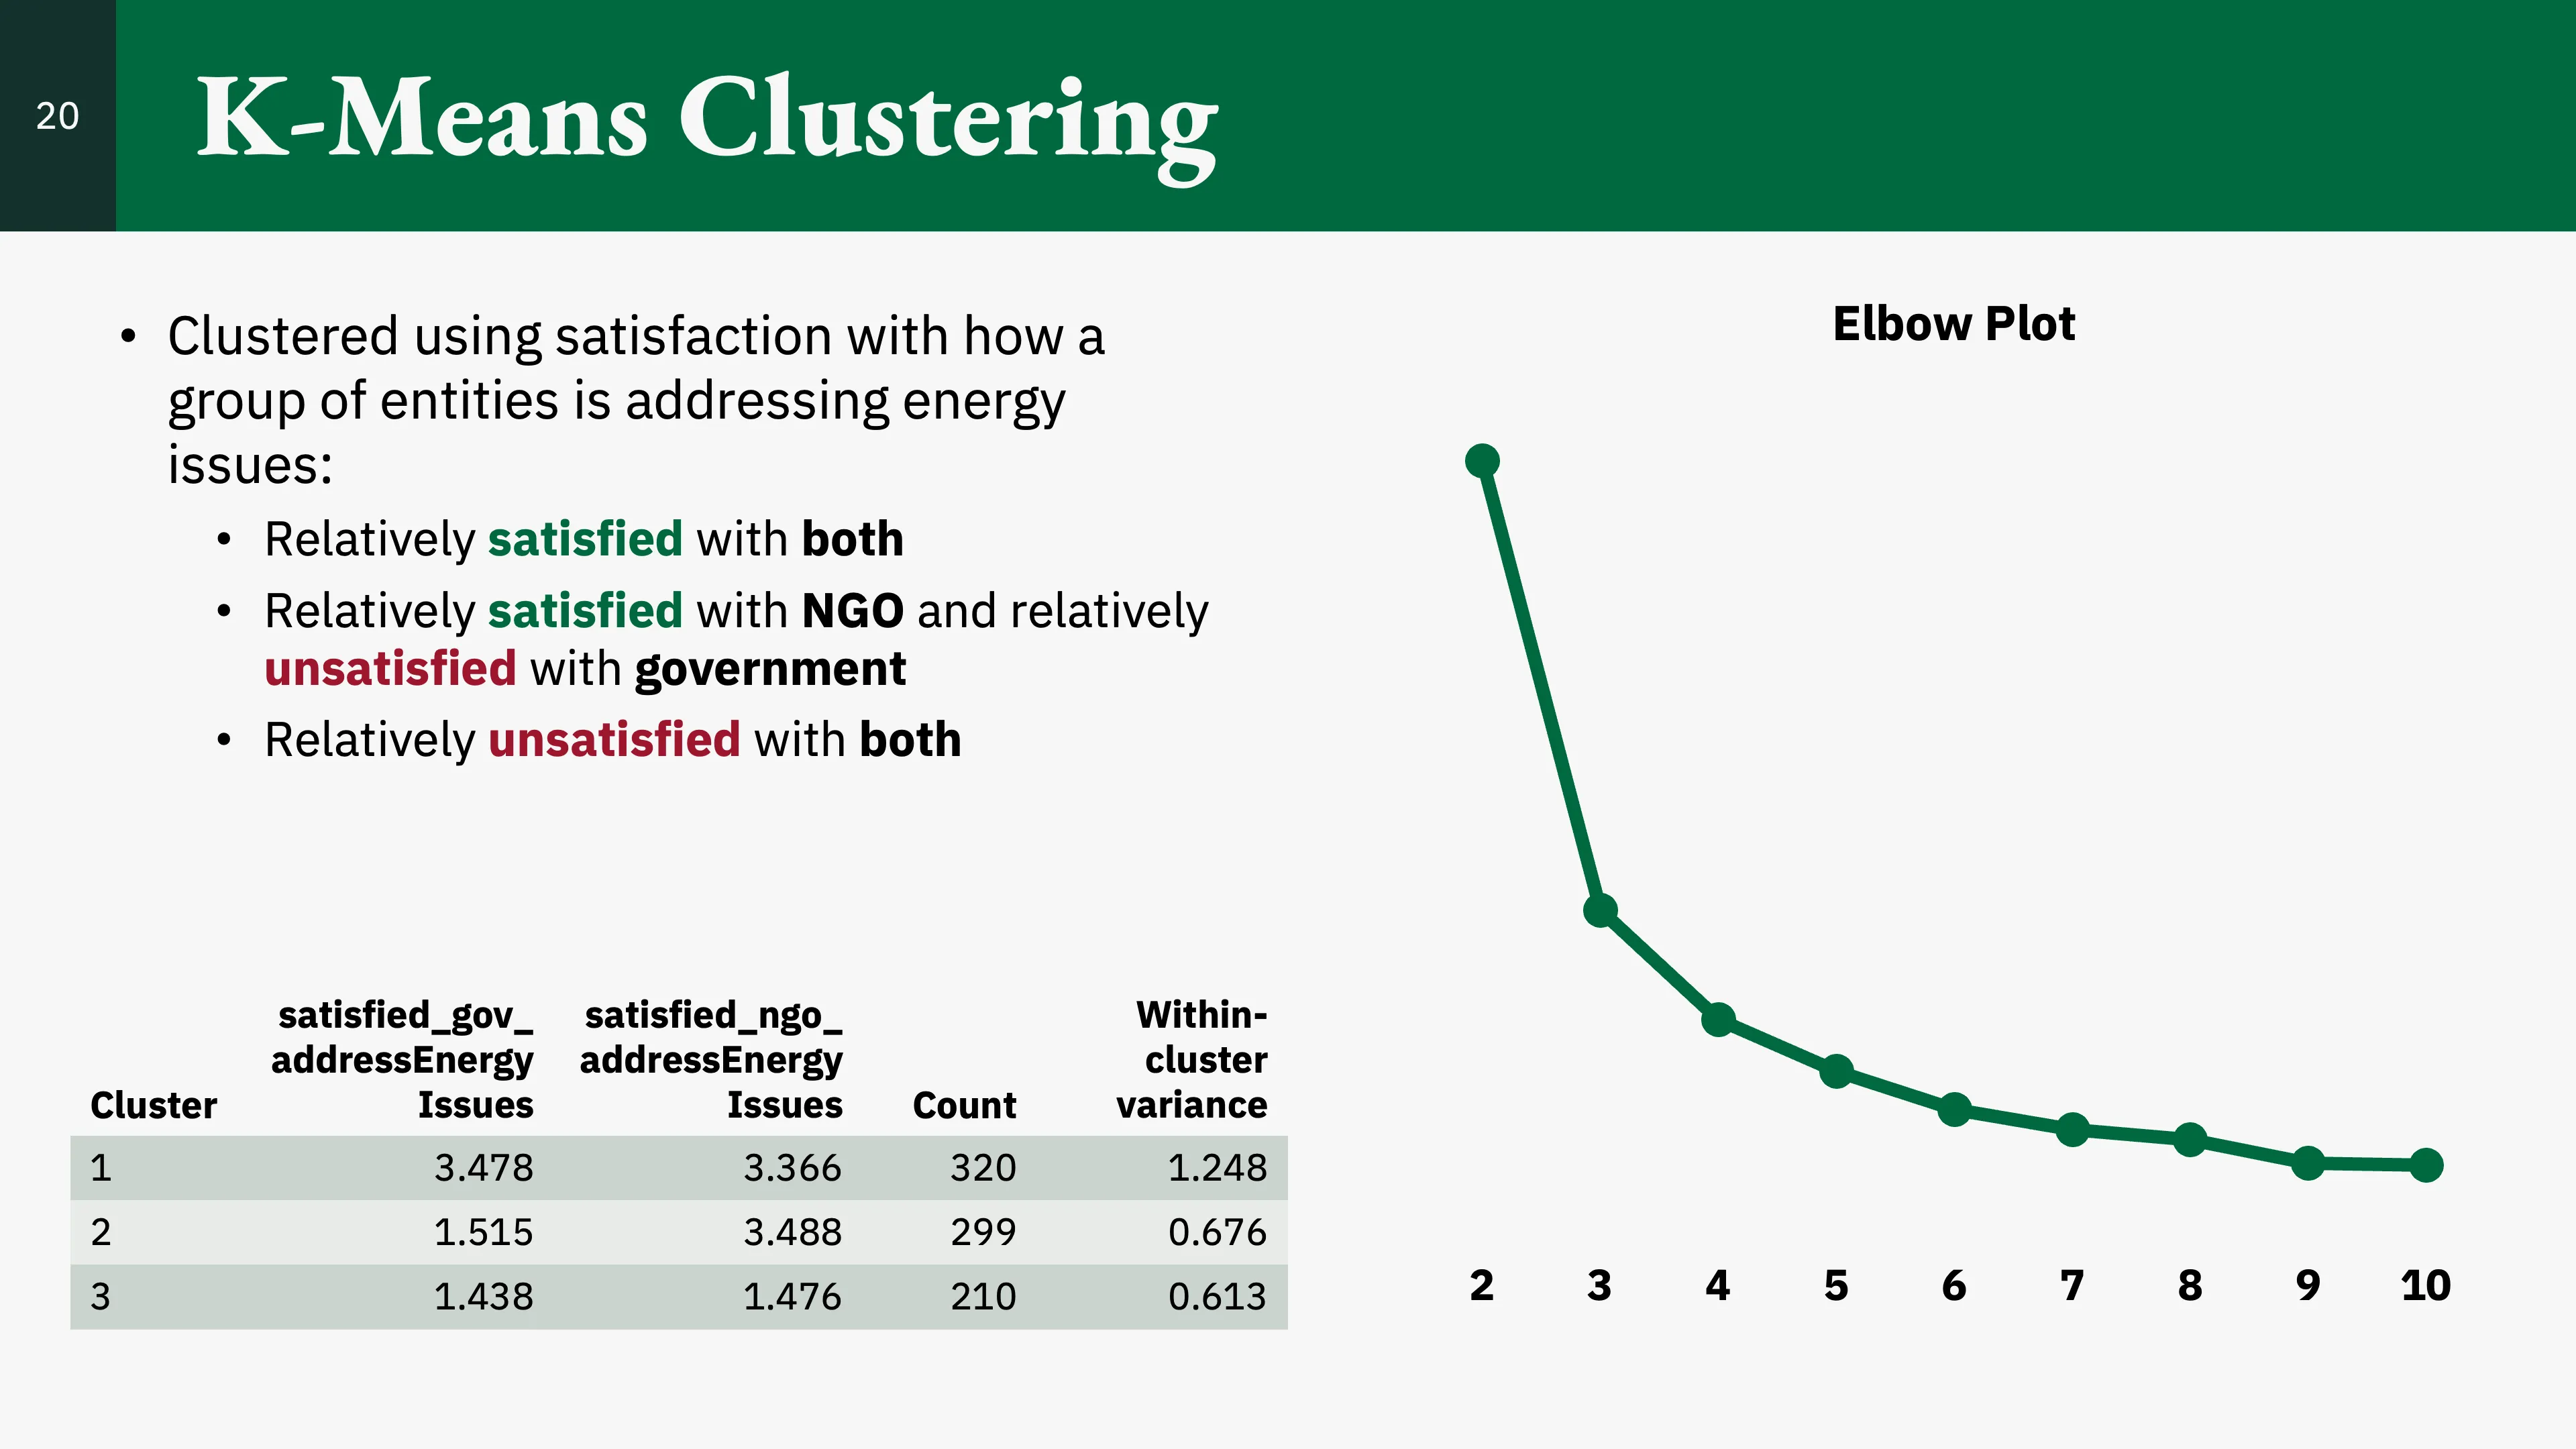 Slide 19, detailing the results of the k-means clustering.